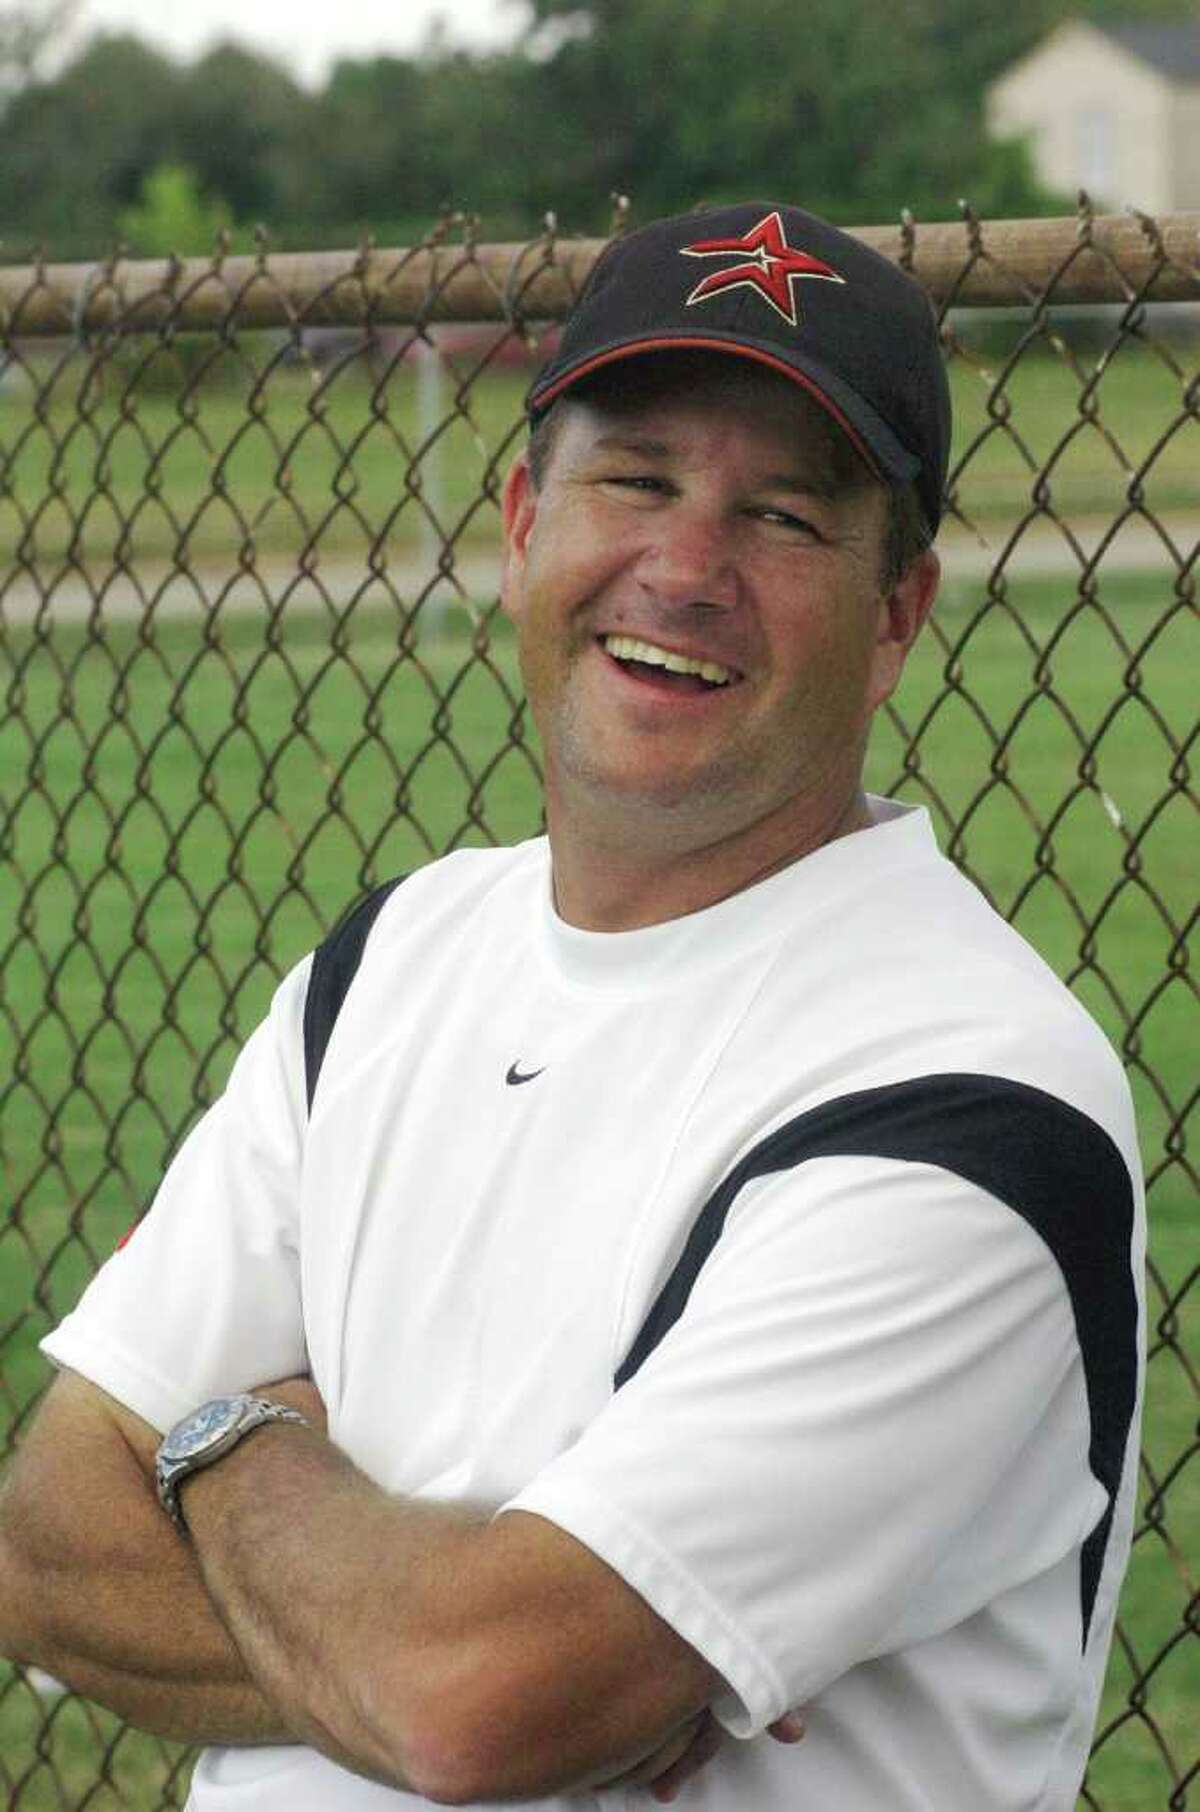 Memorial High School tennis coach, Budd Booth watches matches against Northbrook High School, Friday, Sept. 24, 2004